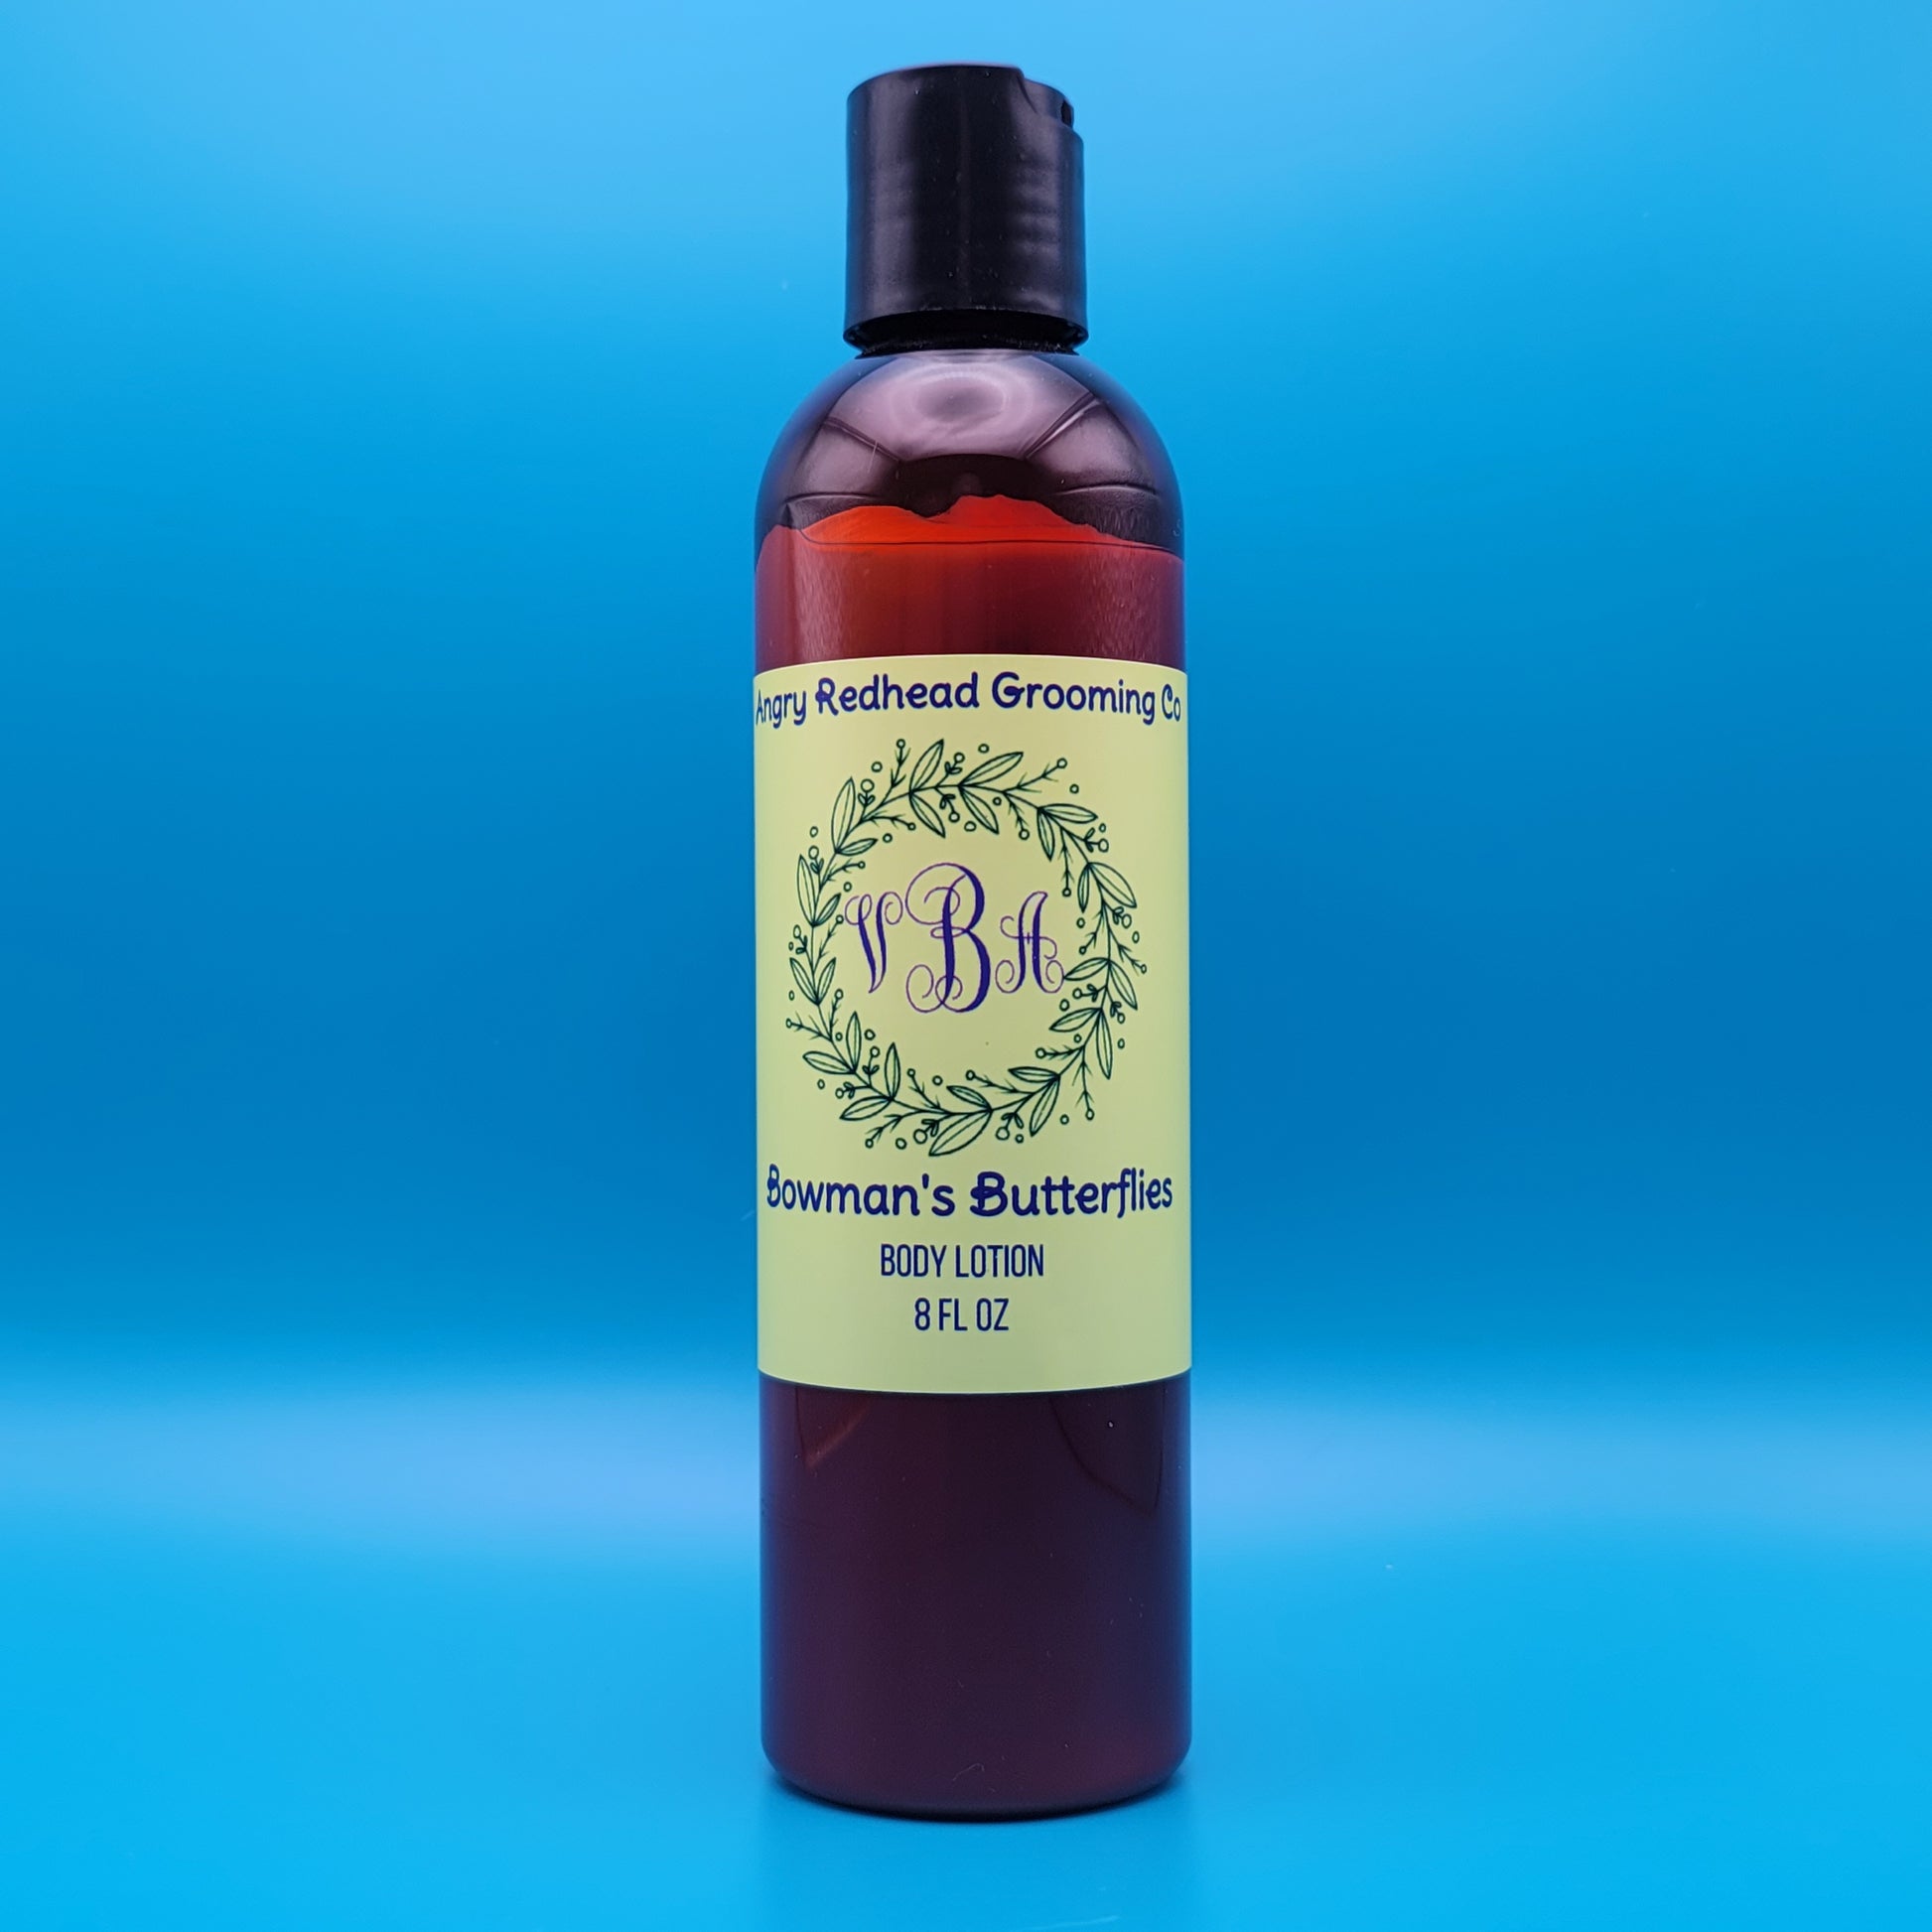 Bowman's Butterflies Body Lotion by Angry Redhead Grooming Co - angryredheadgrooming.com